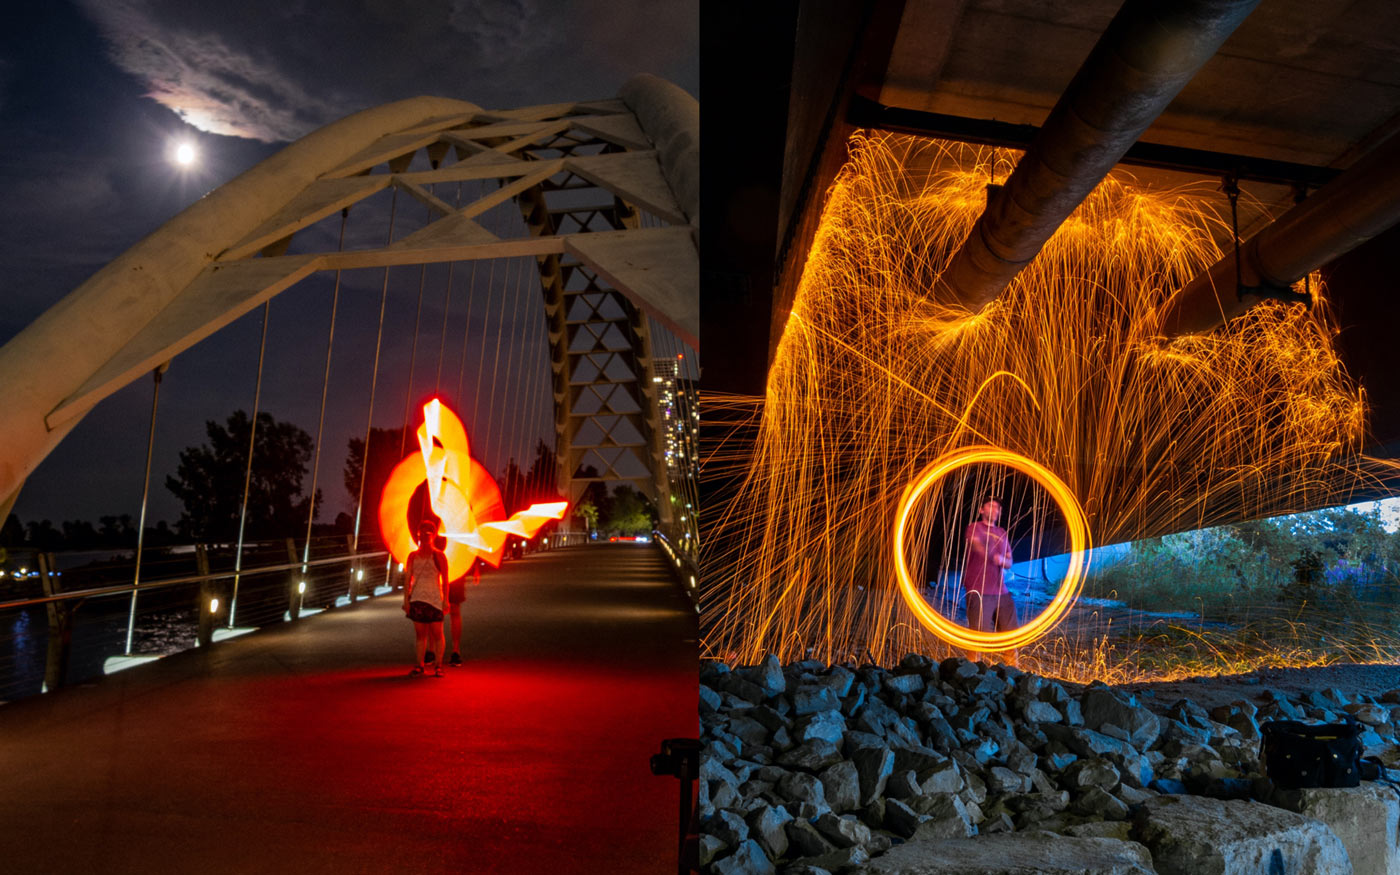 Long Exposure Photography Experiments with Light Painting and Steel Wool Spinning